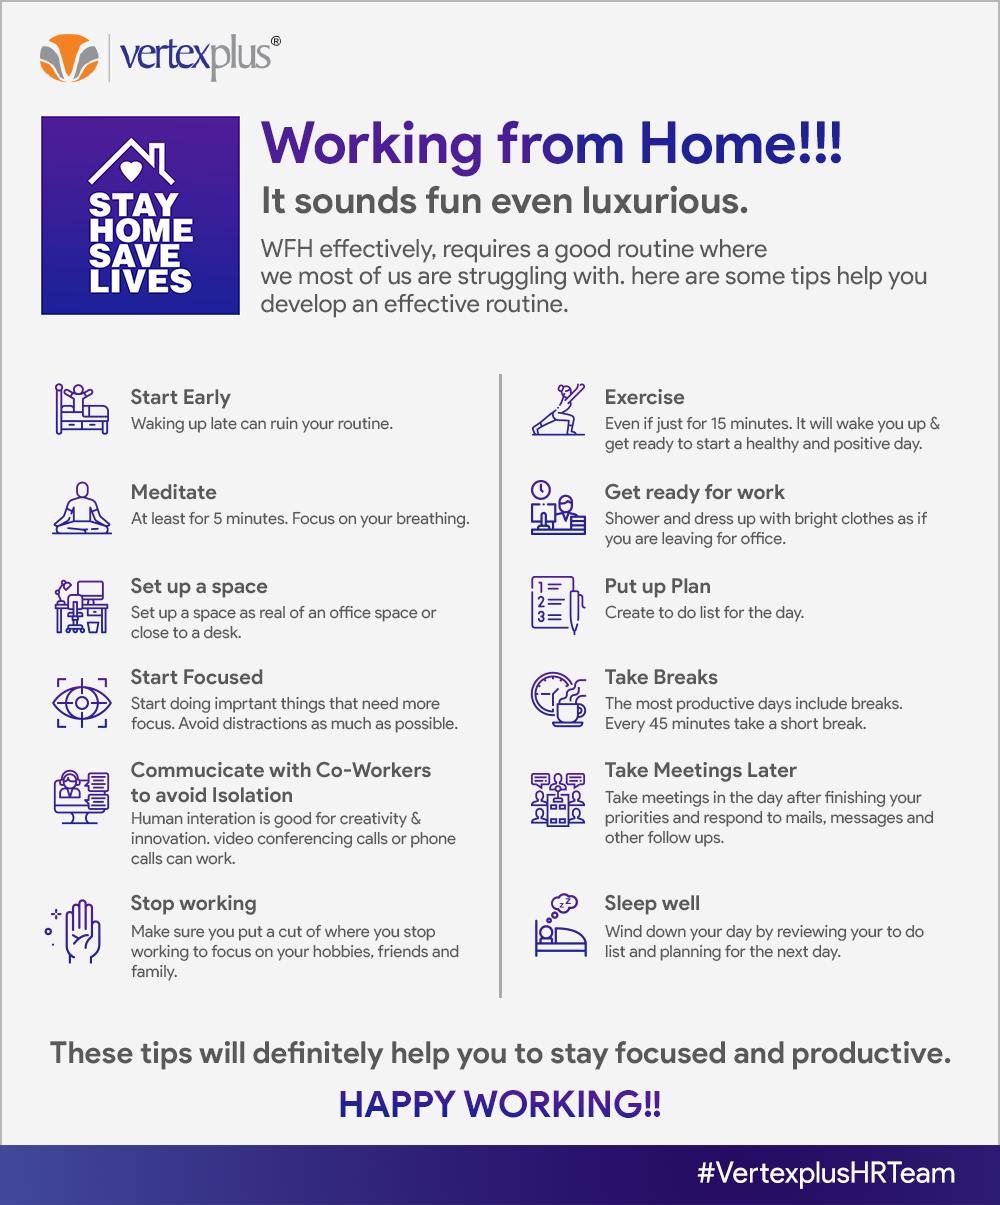 Work from Home Tips.jpg Working from Home!!!  It sounds fun, even luxurious. WFH effectively requires a good routine where most of us are struggling with. Here are some tips to help you develop an effective routine. by VertexPlusSingapore